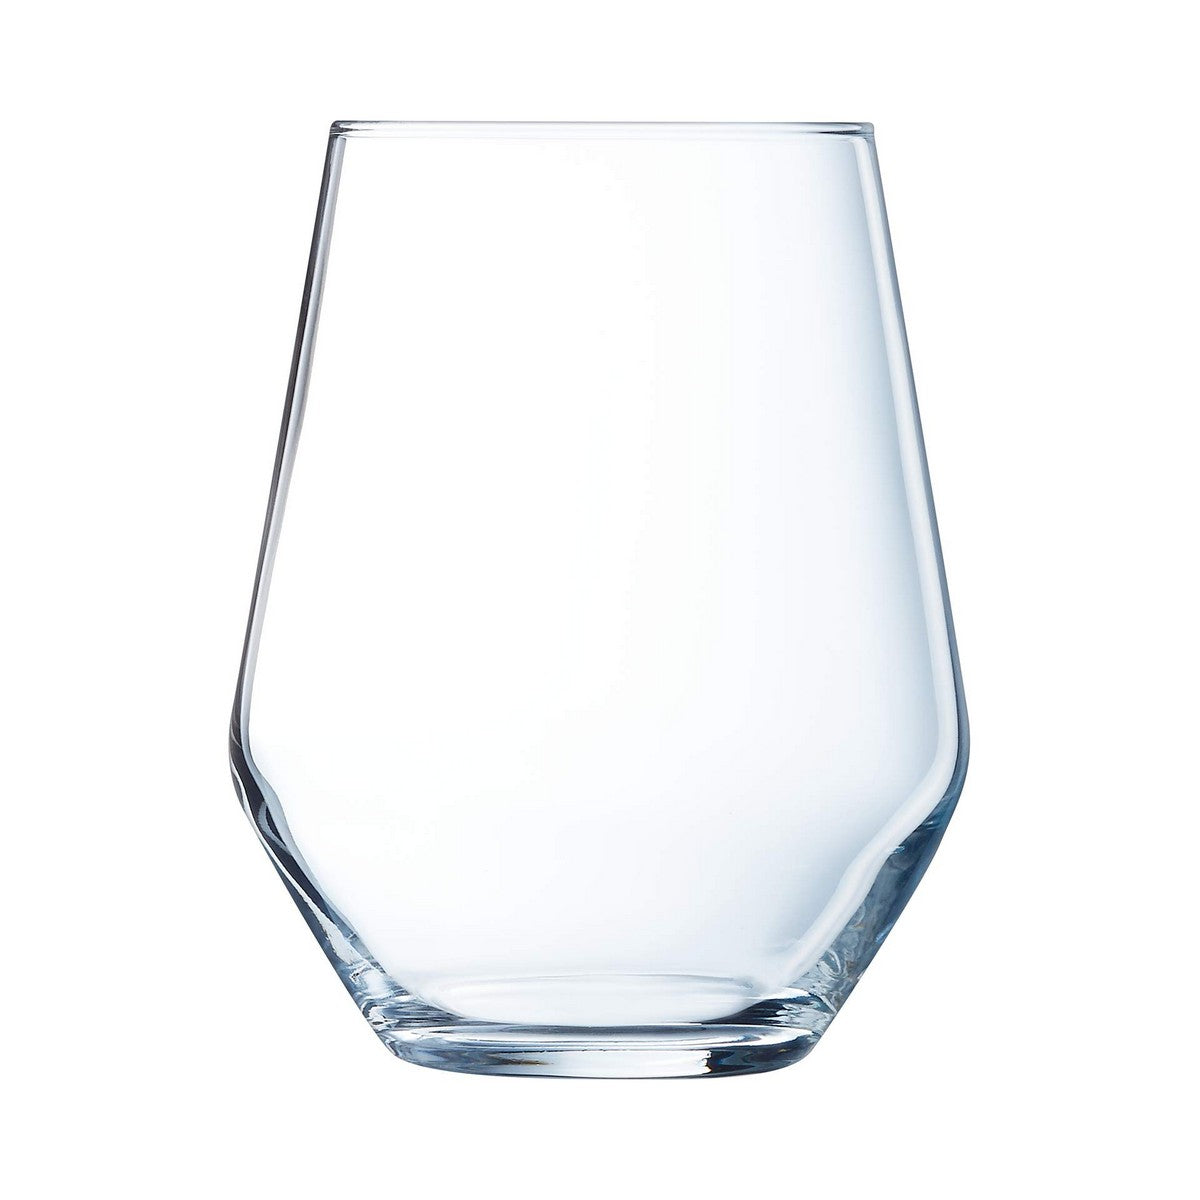 Set of water glasses - 6 pieces